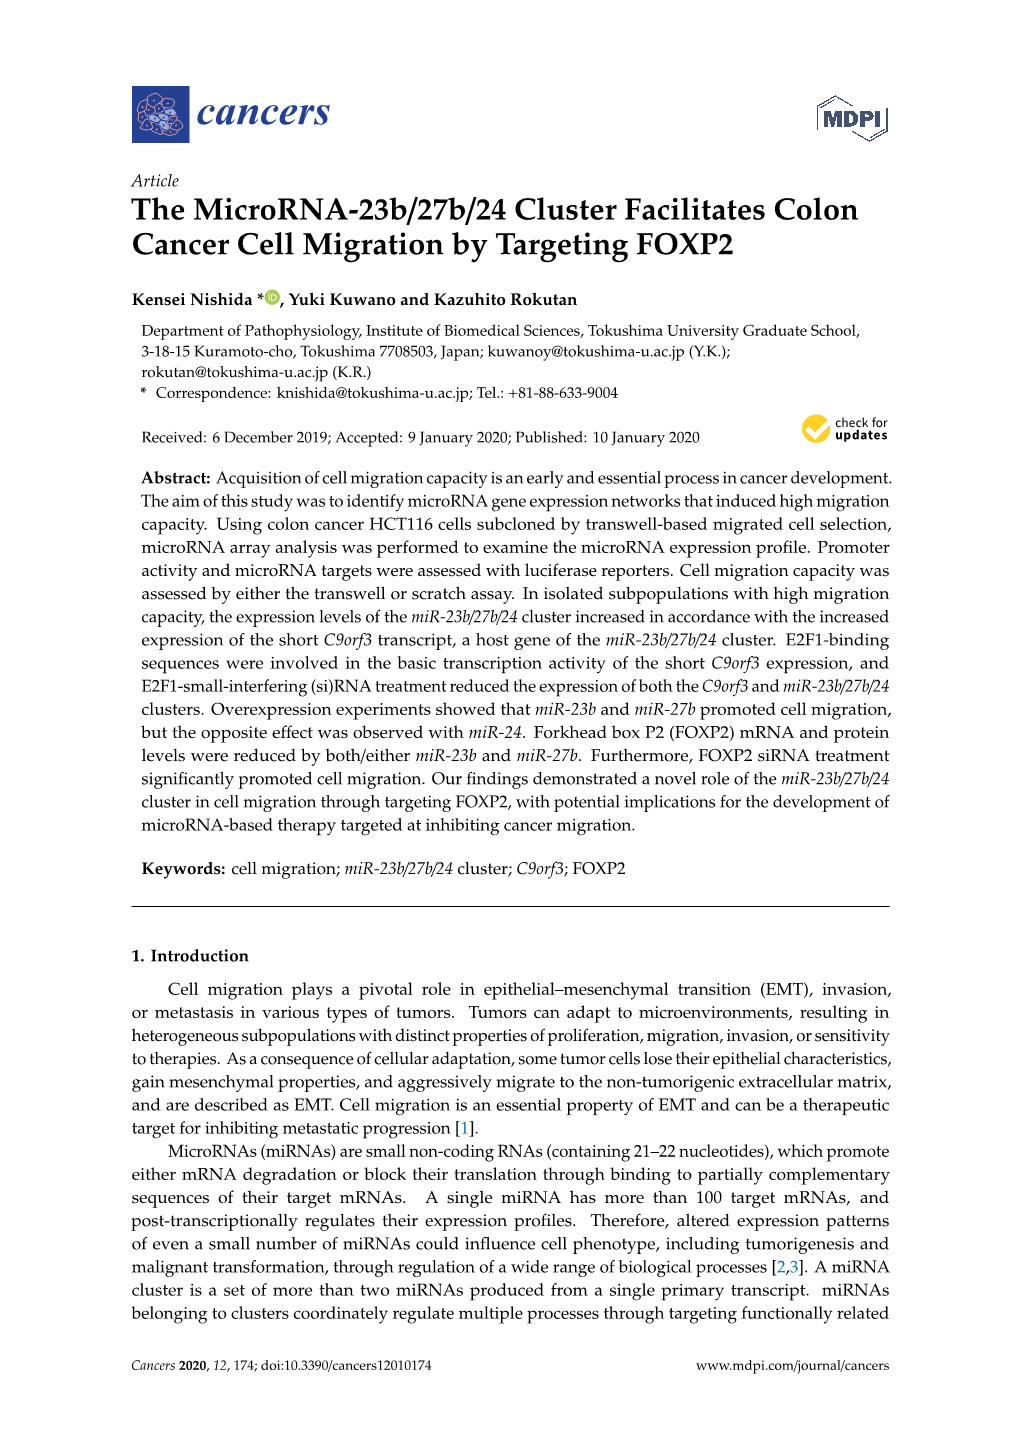 The Microrna-23B/27B/24 Cluster Facilitates Colon Cancer Cell Migration by Targeting FOXP2